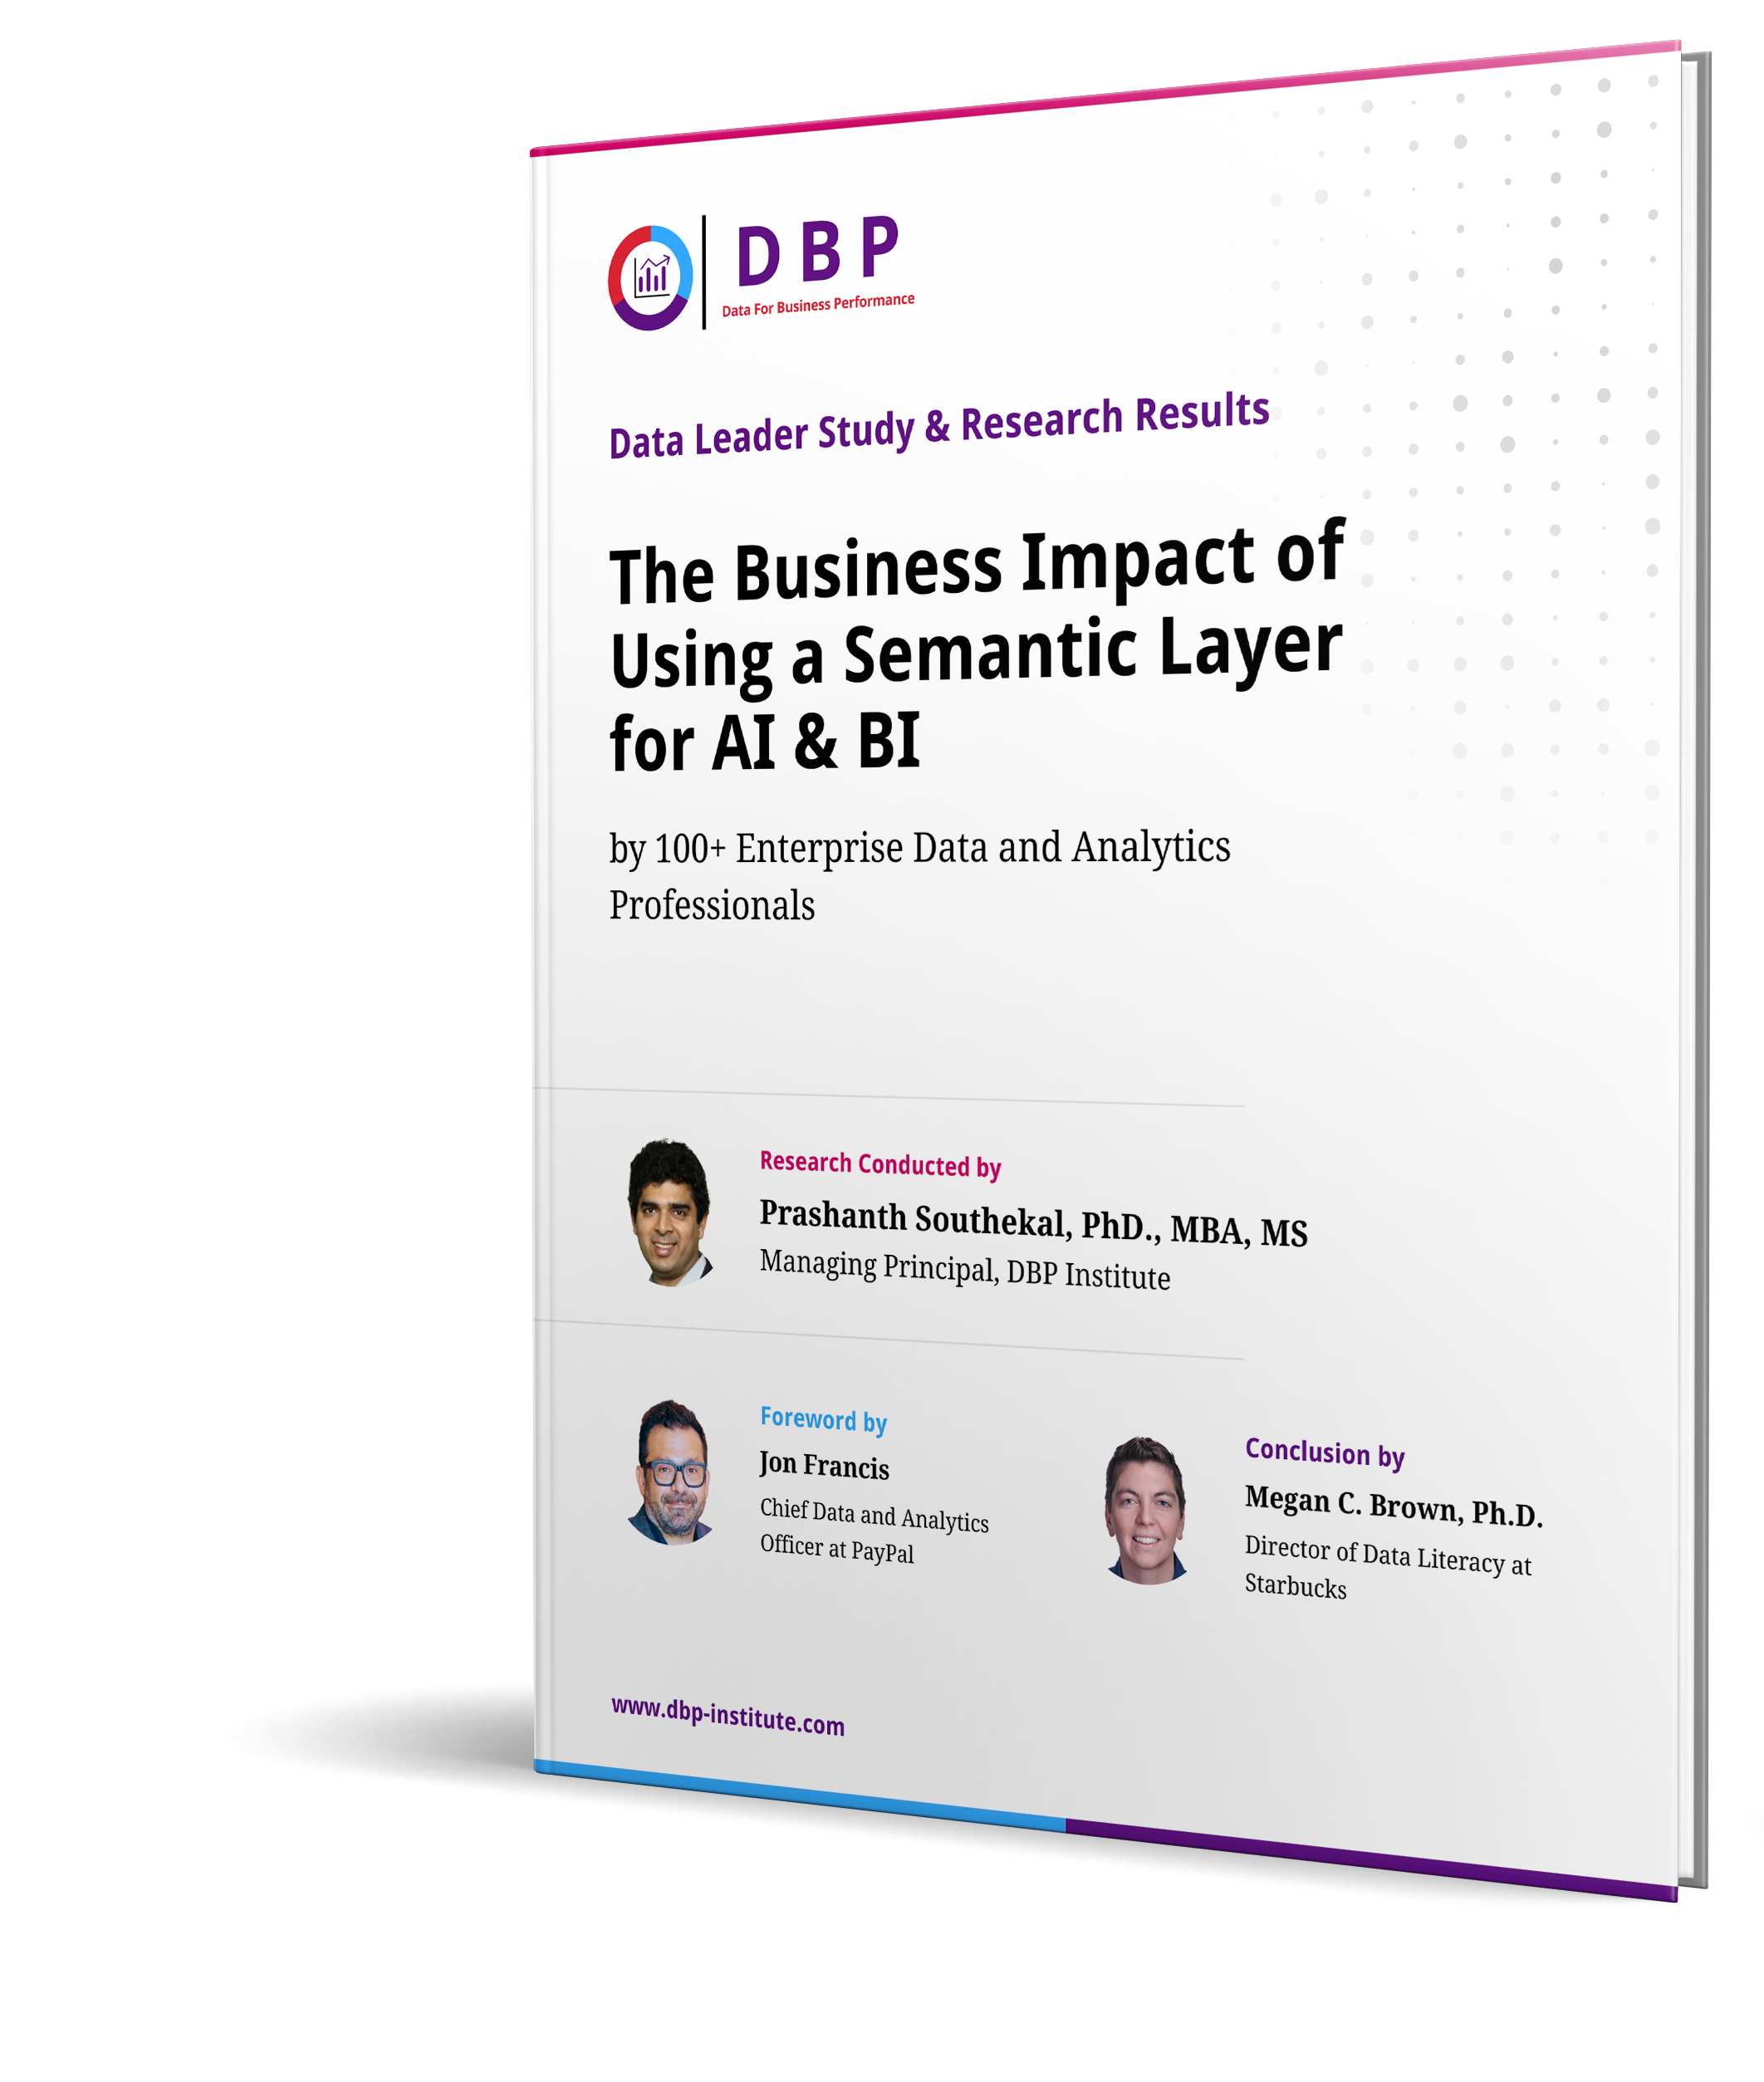 Data Leader Study & Research Results: The Business Impact of Using a Semantic Layer for AI & BI